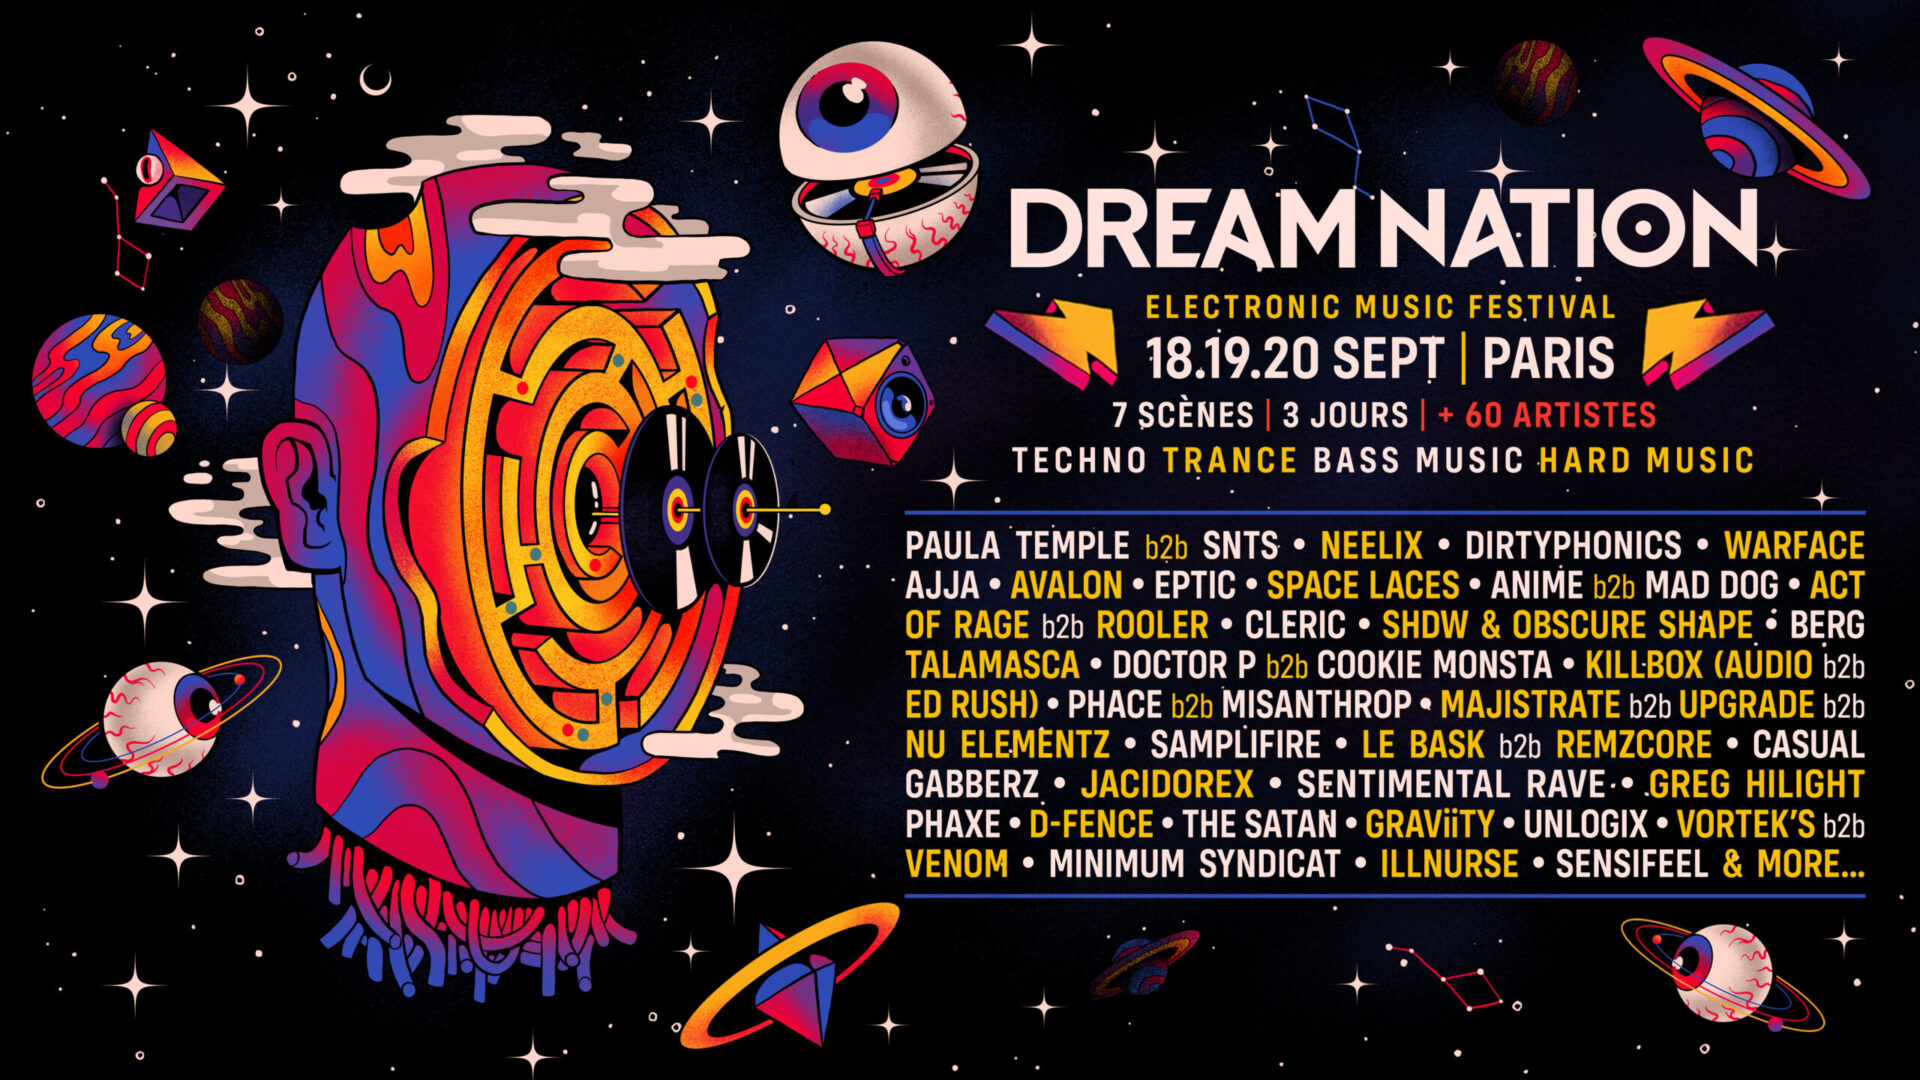 Dream Nation Festival 2020 unveils its incredible line-up